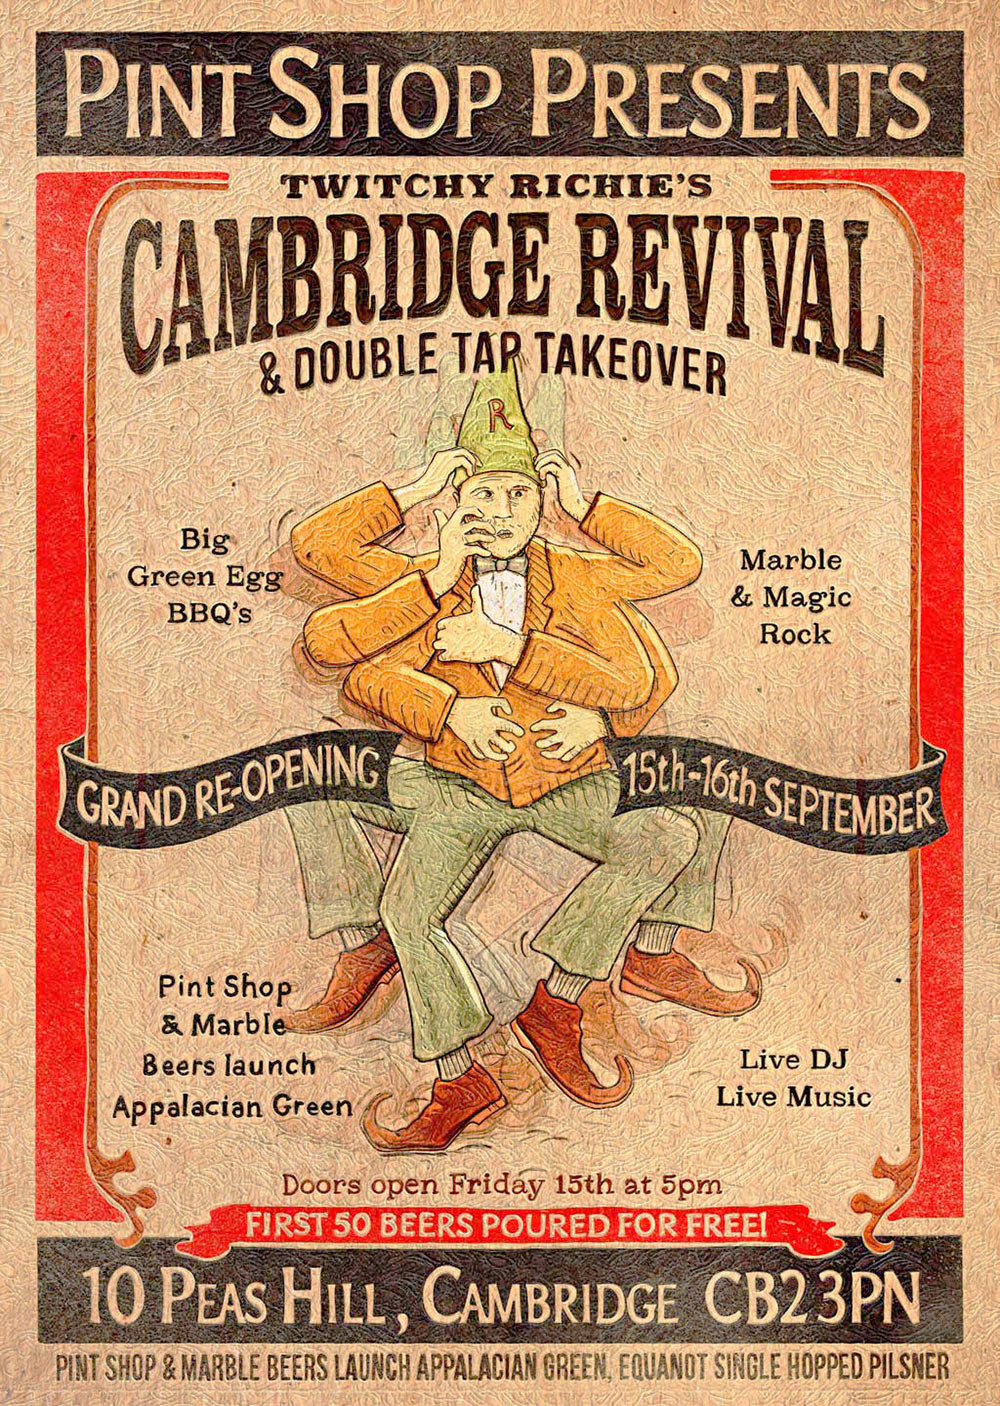 Vintage styled poster of a jester character for Pint Shop in Cambridge, illustrated by SAINT Design.